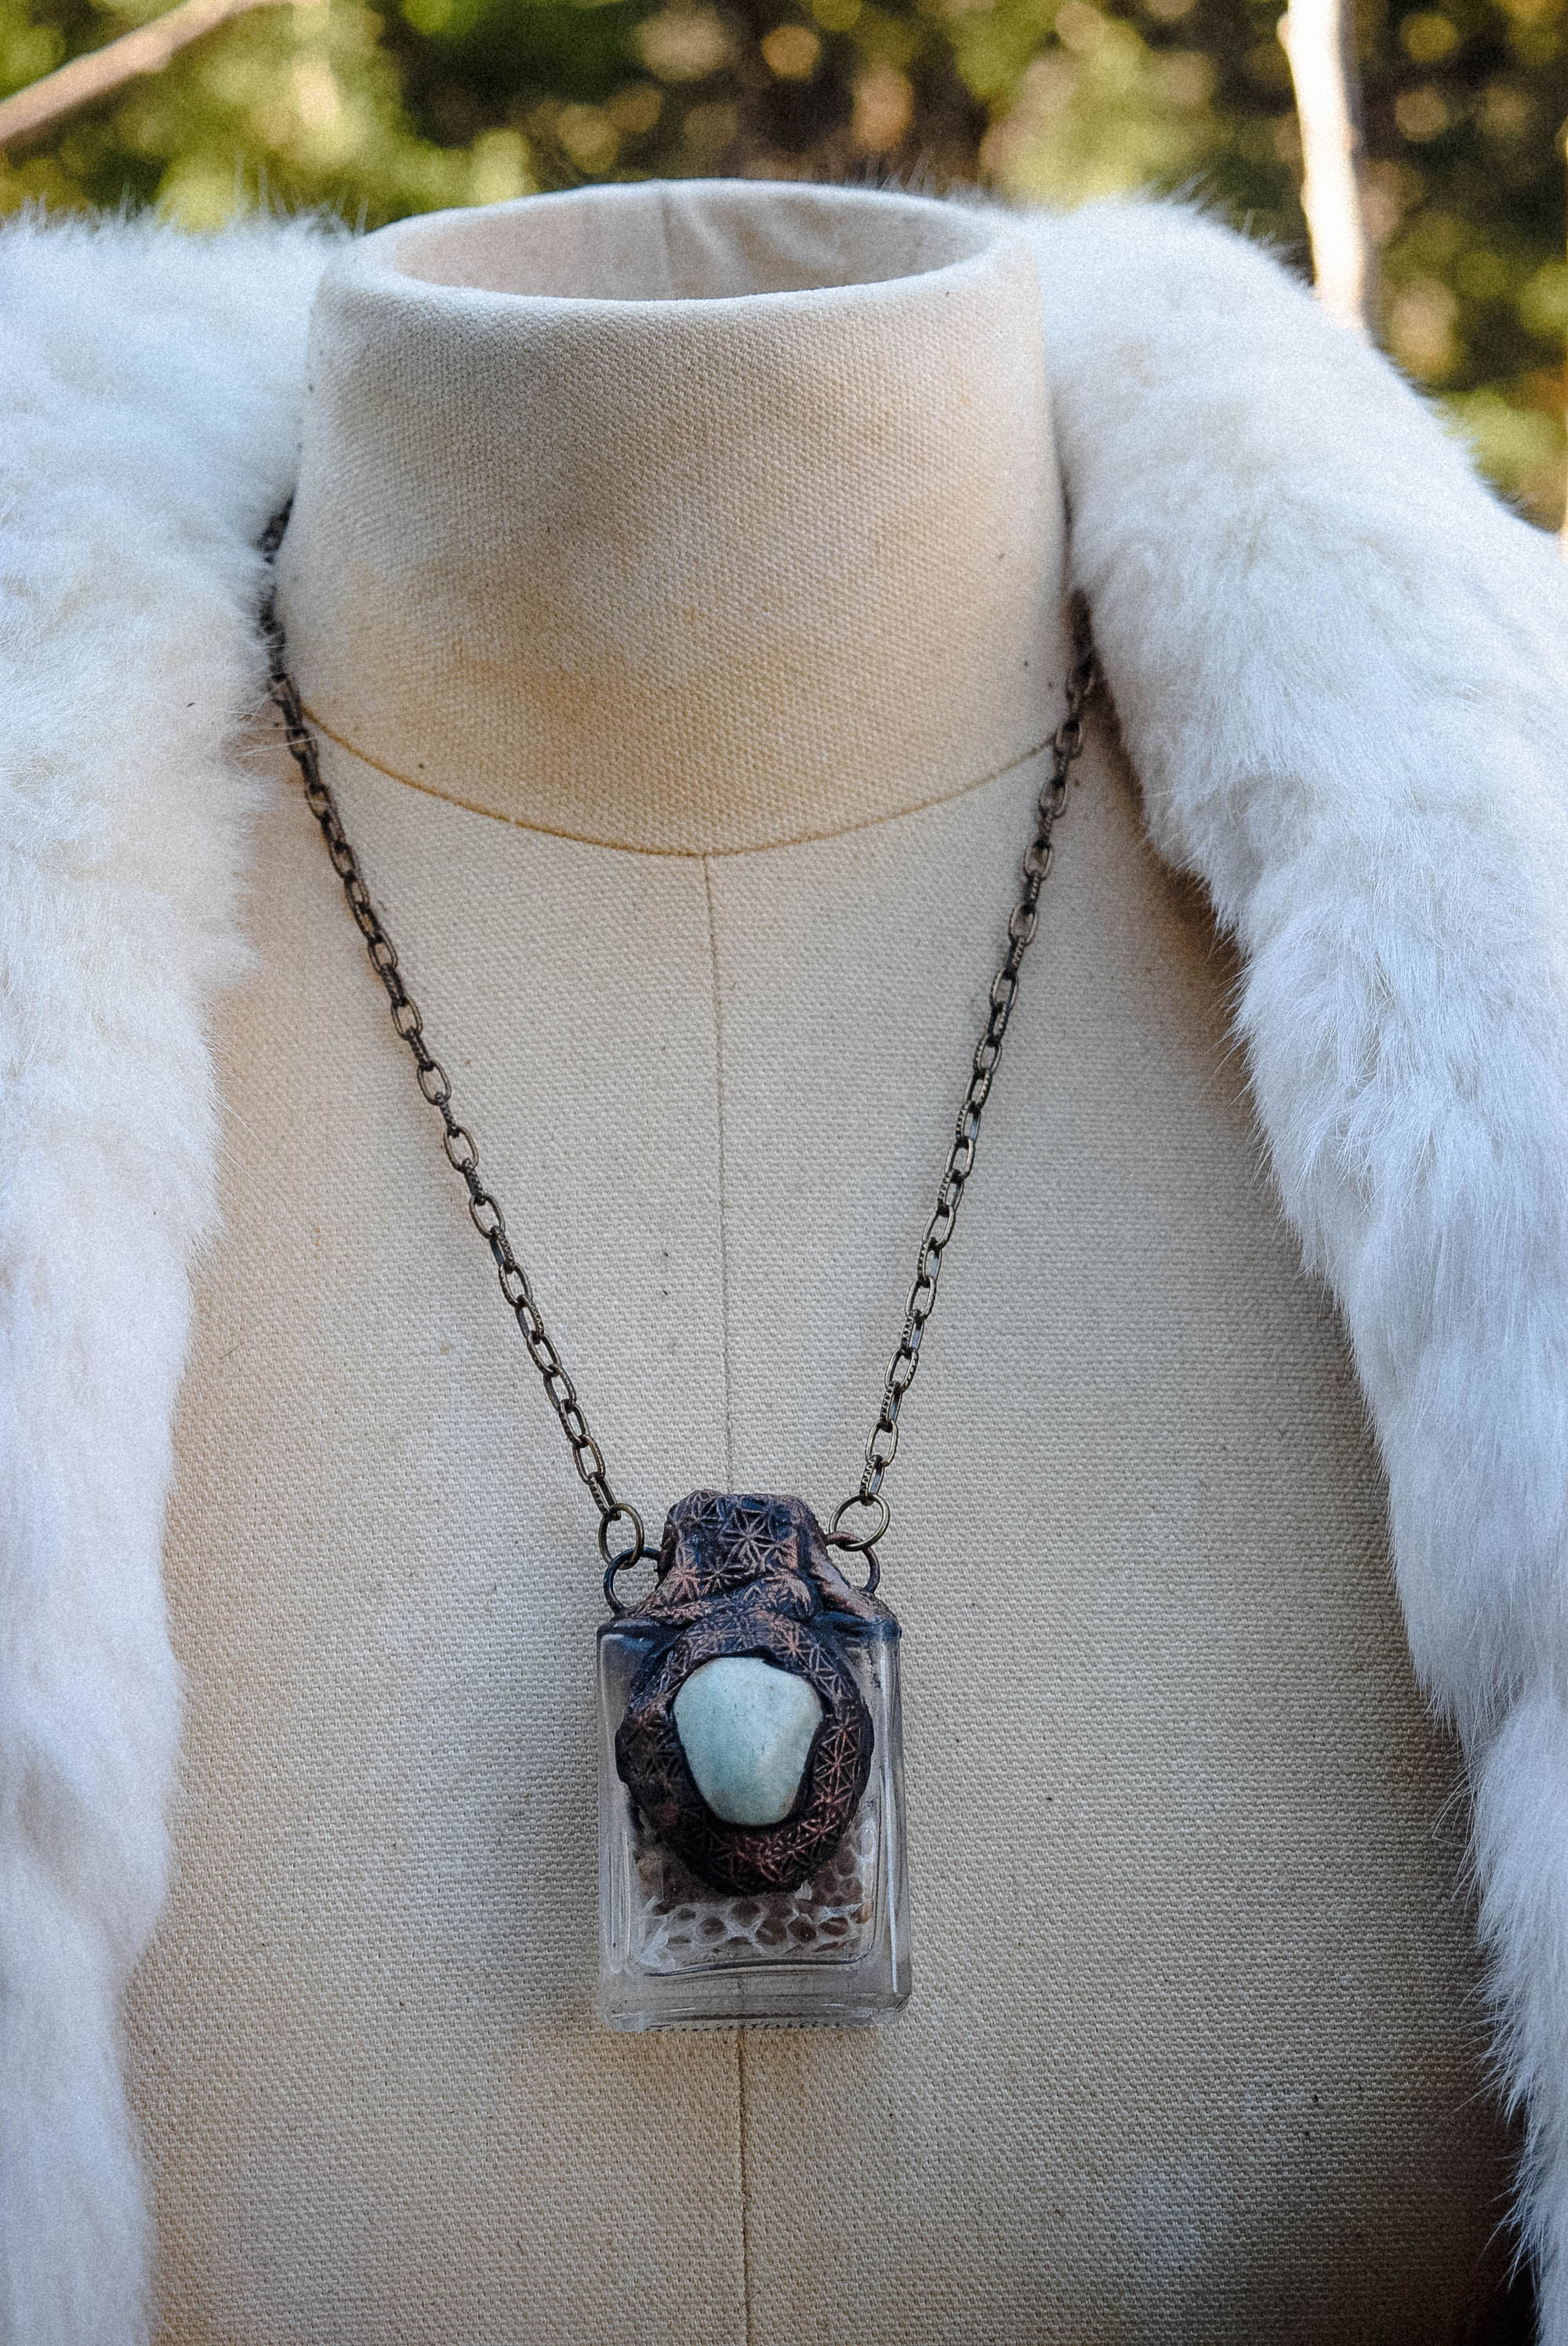 Gatekeeper Necklace with Snake Skin, Chrysoprase + Mugwort- A Necklace for Self Discovery and Transformation